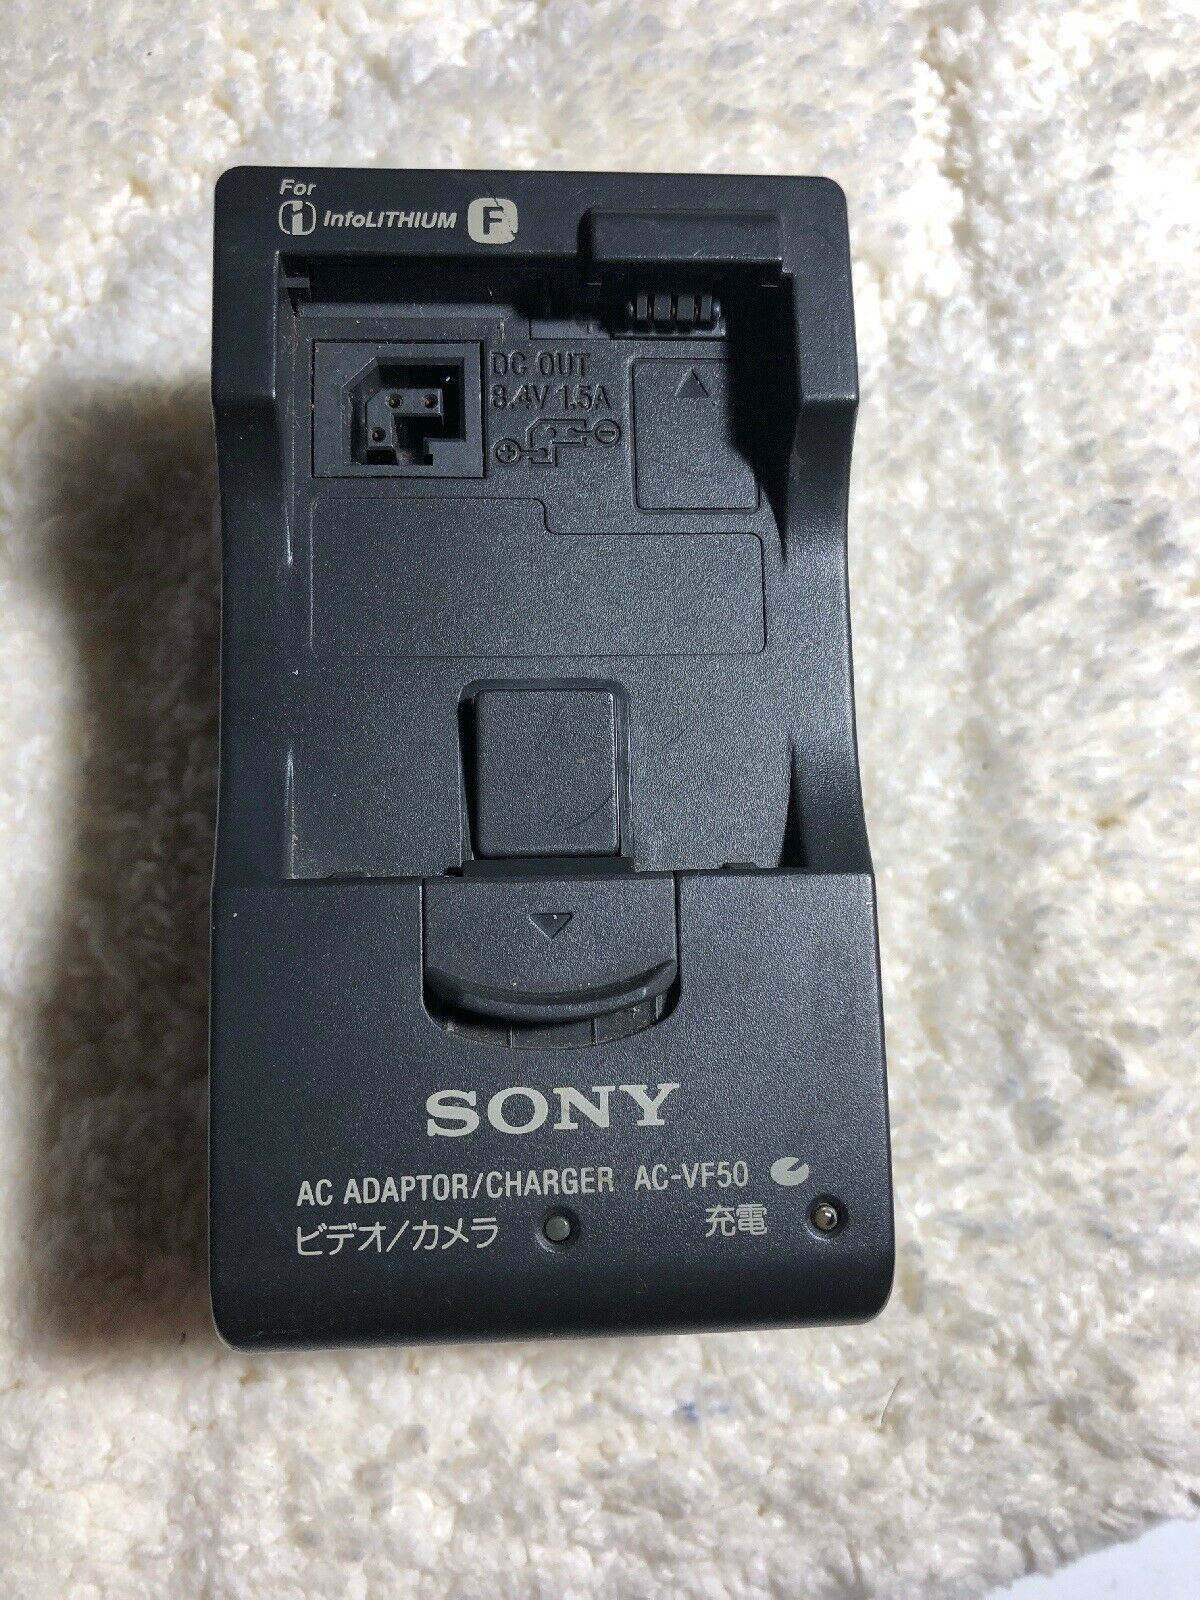 Sony AC-VF50 AC Adaptor / Charger for "F" Battery - No Have Power Cord US Seller Brand: Sony MPN: AC-VF50 UPC: Doe